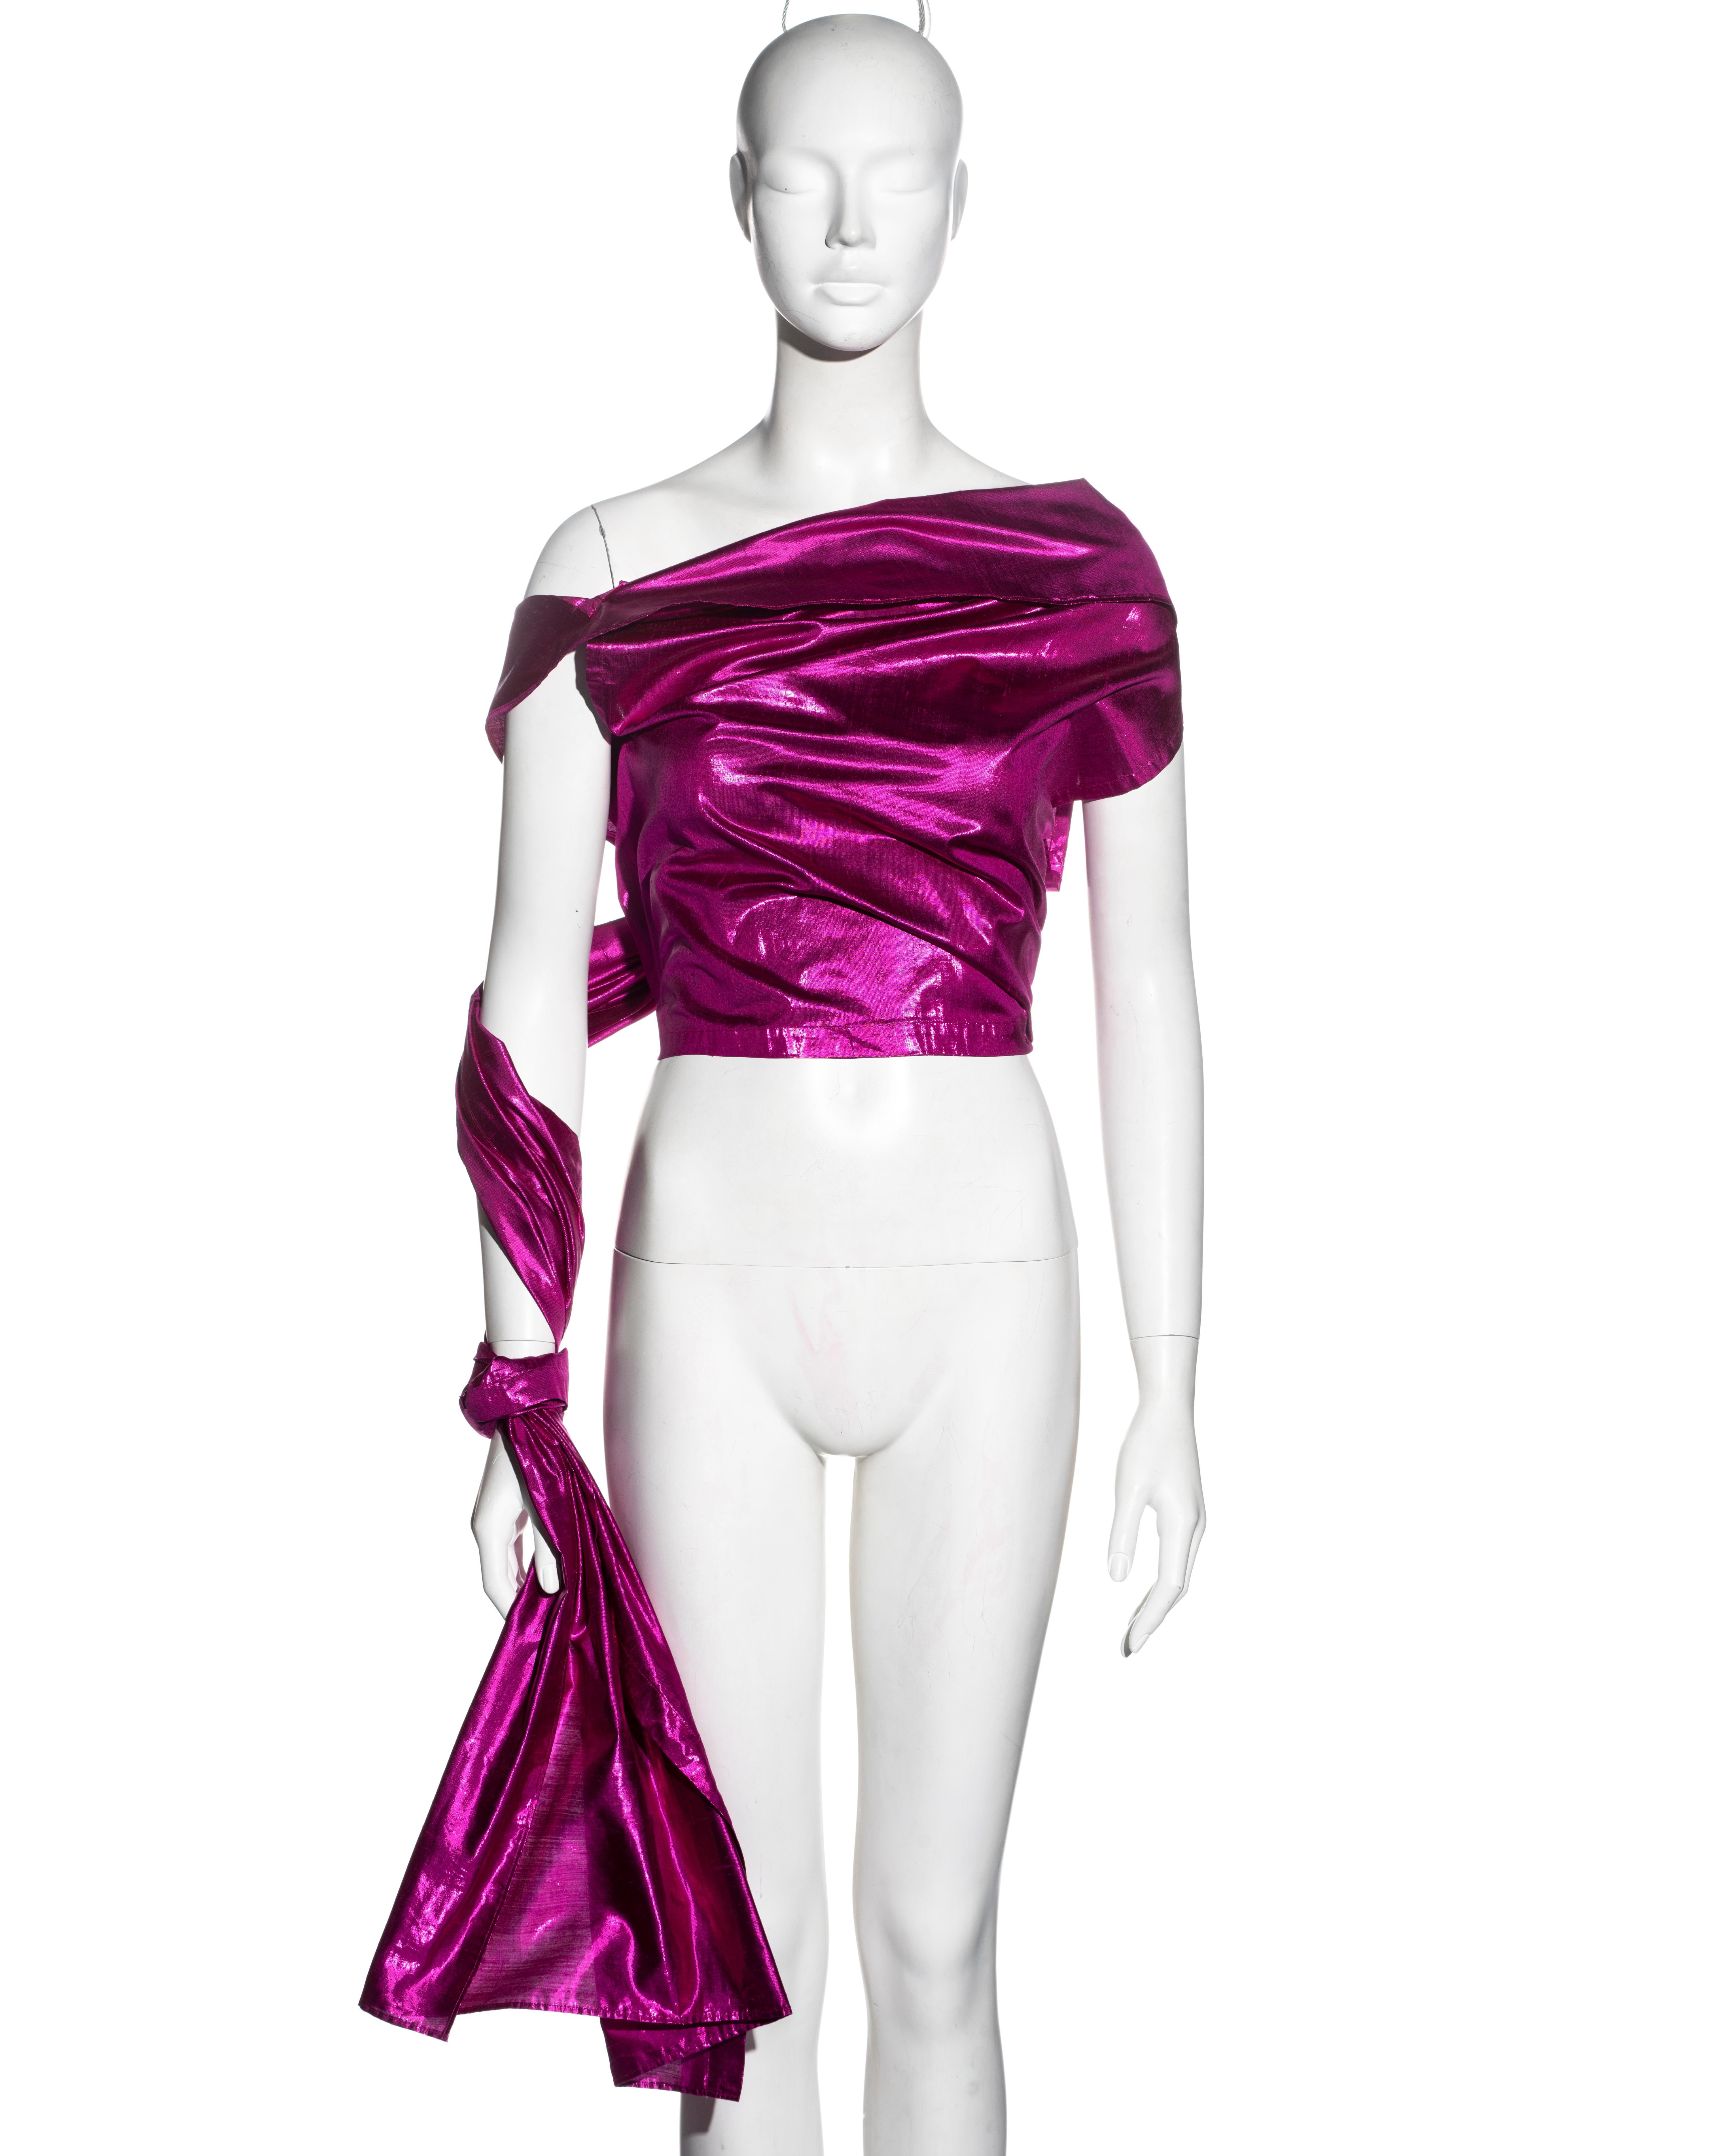 ▪ Jean Paul Gaultier wrap top
▪ Metallic fuchsia pink silk taffeta 
▪ Extra long panel allowing the garment to be styled in multiple ways
▪ IT 46 - FR 42 - UK 14 
▪ Spring-Summer 2000
▪ 61% Polyester, 39% Silk
▪ Made in Italy